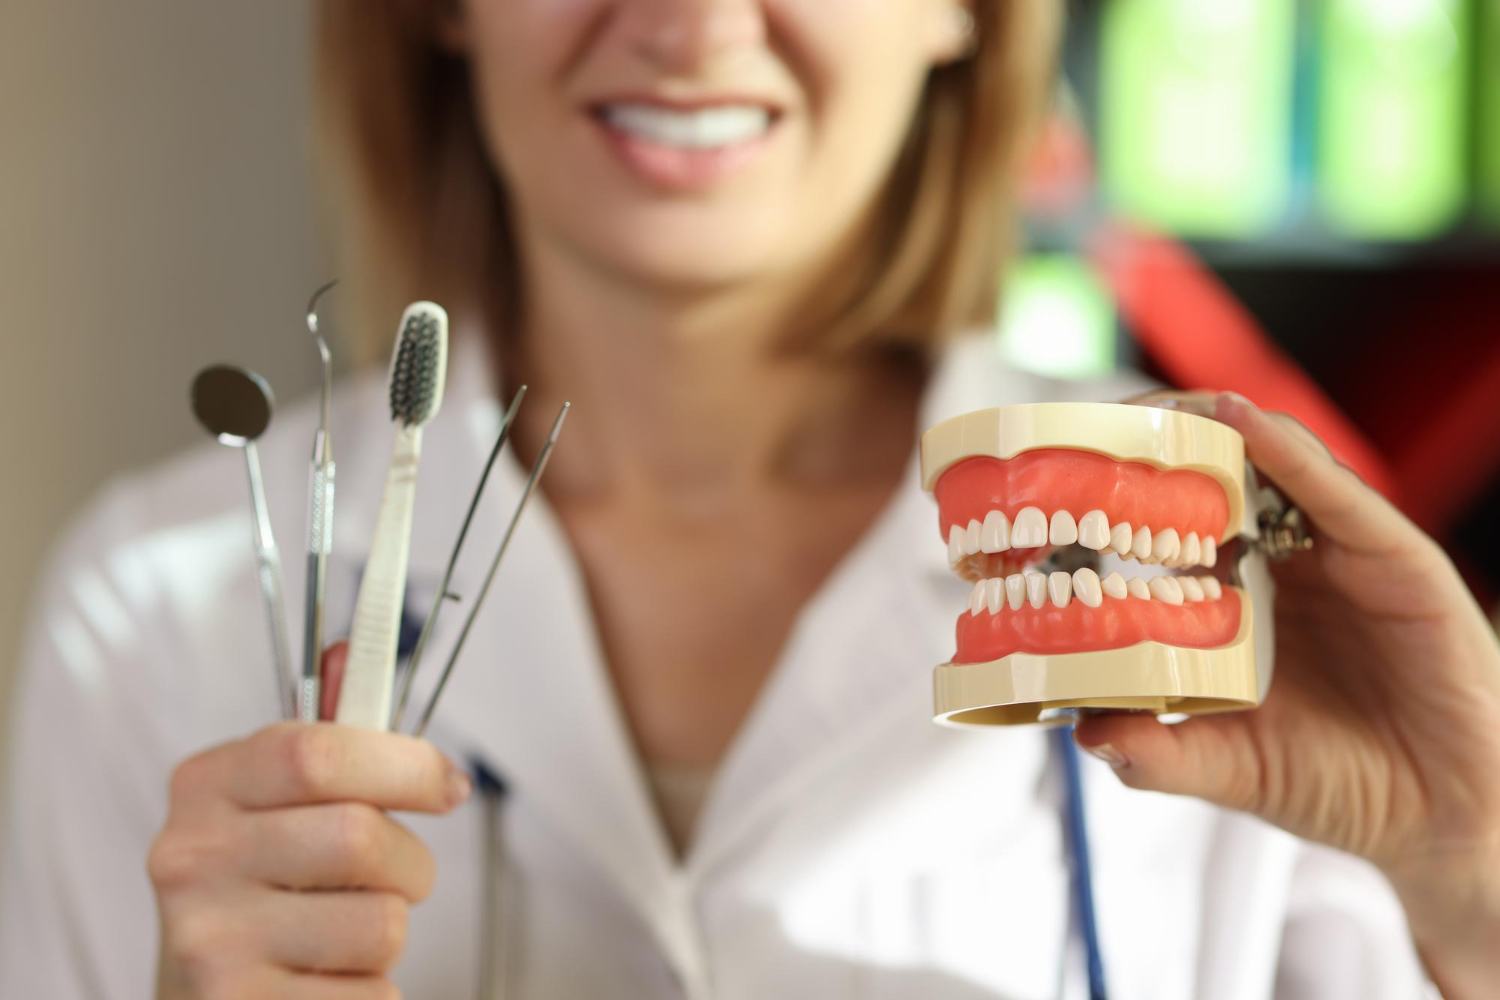 positive-dentist-holds-teeth-care-tools-human-jaws-model-clinic-office-doctor-presents (1)